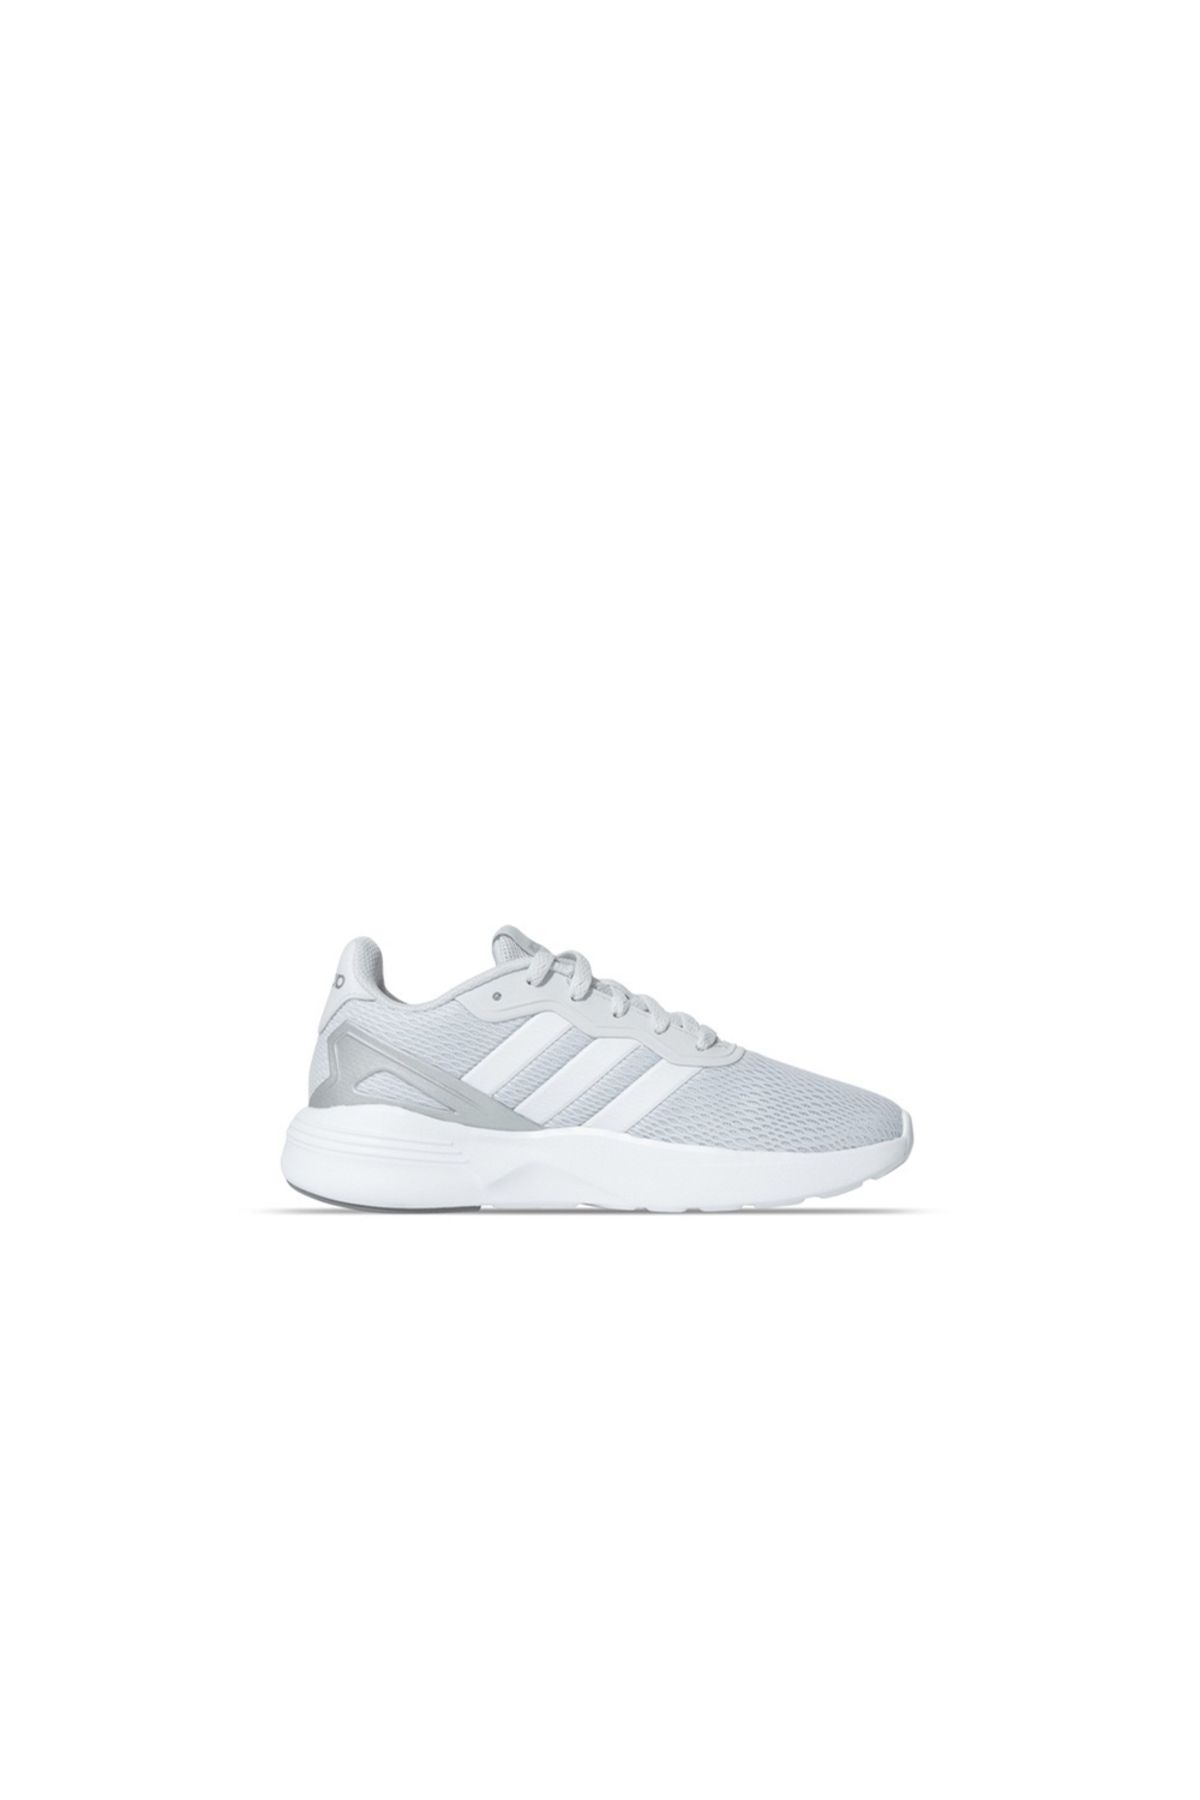 adidas NEBZED DSHGRY/FTWWHT/SILVMT